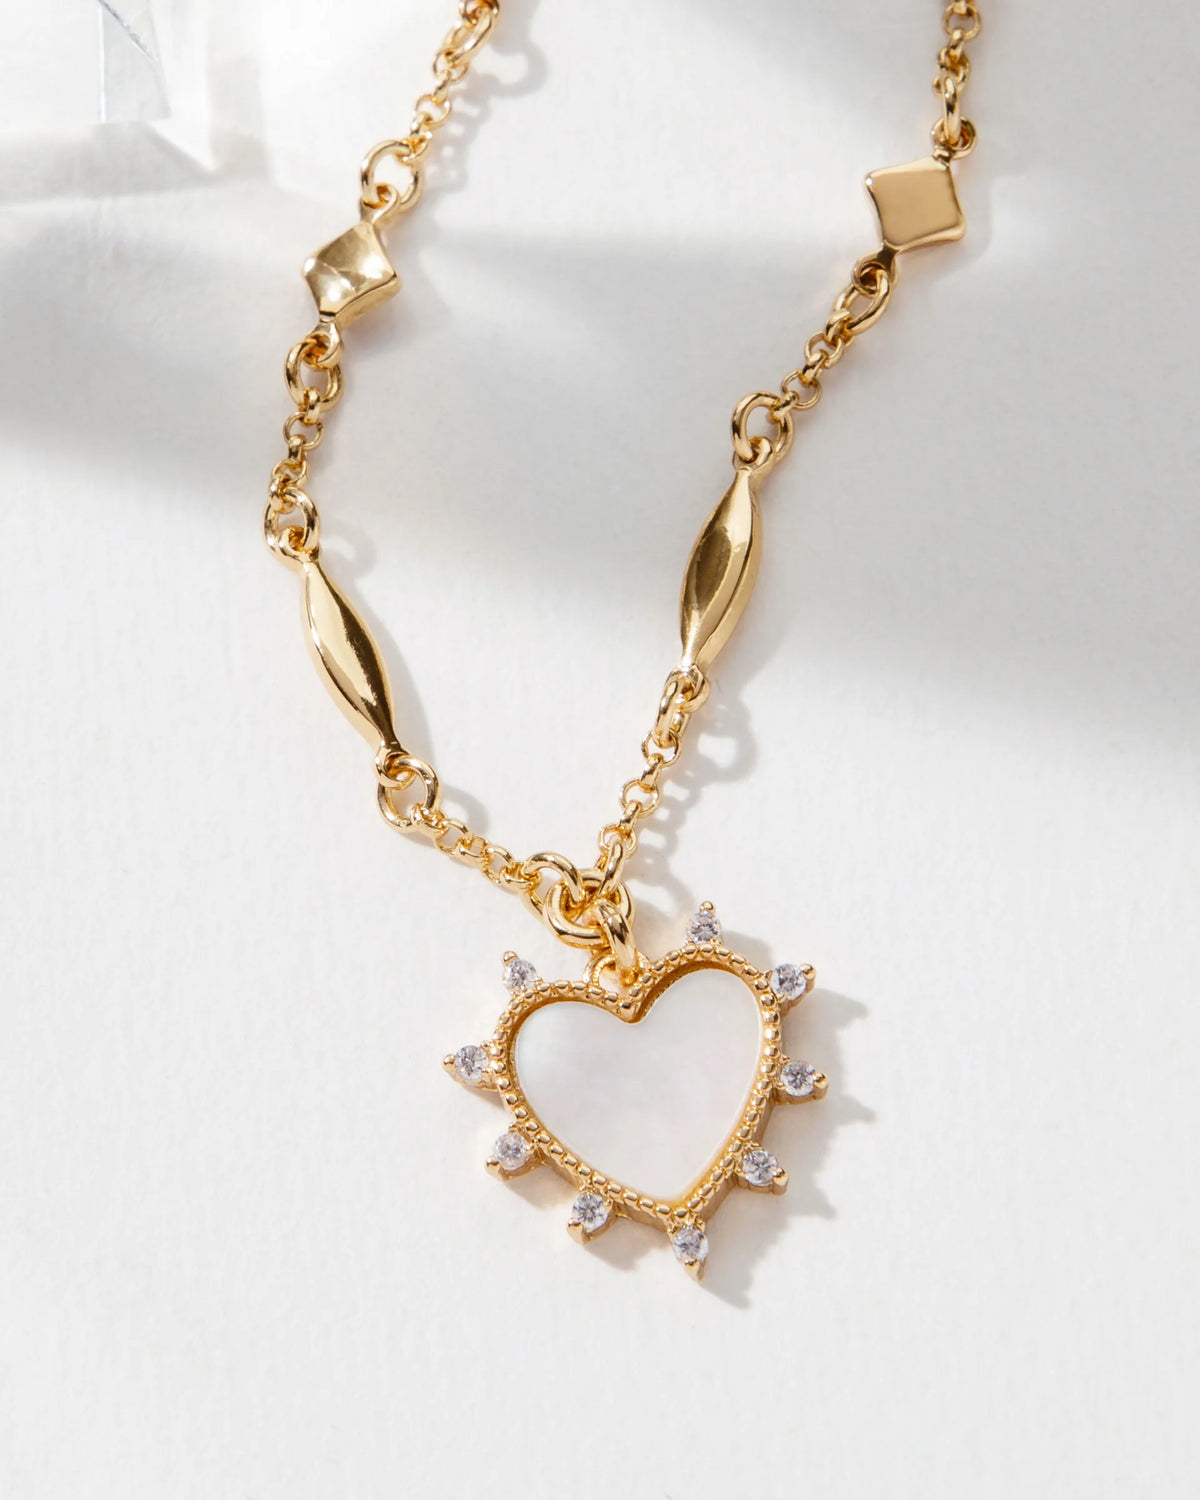 dolce cuore charm heart necklace by luna norte jewelry